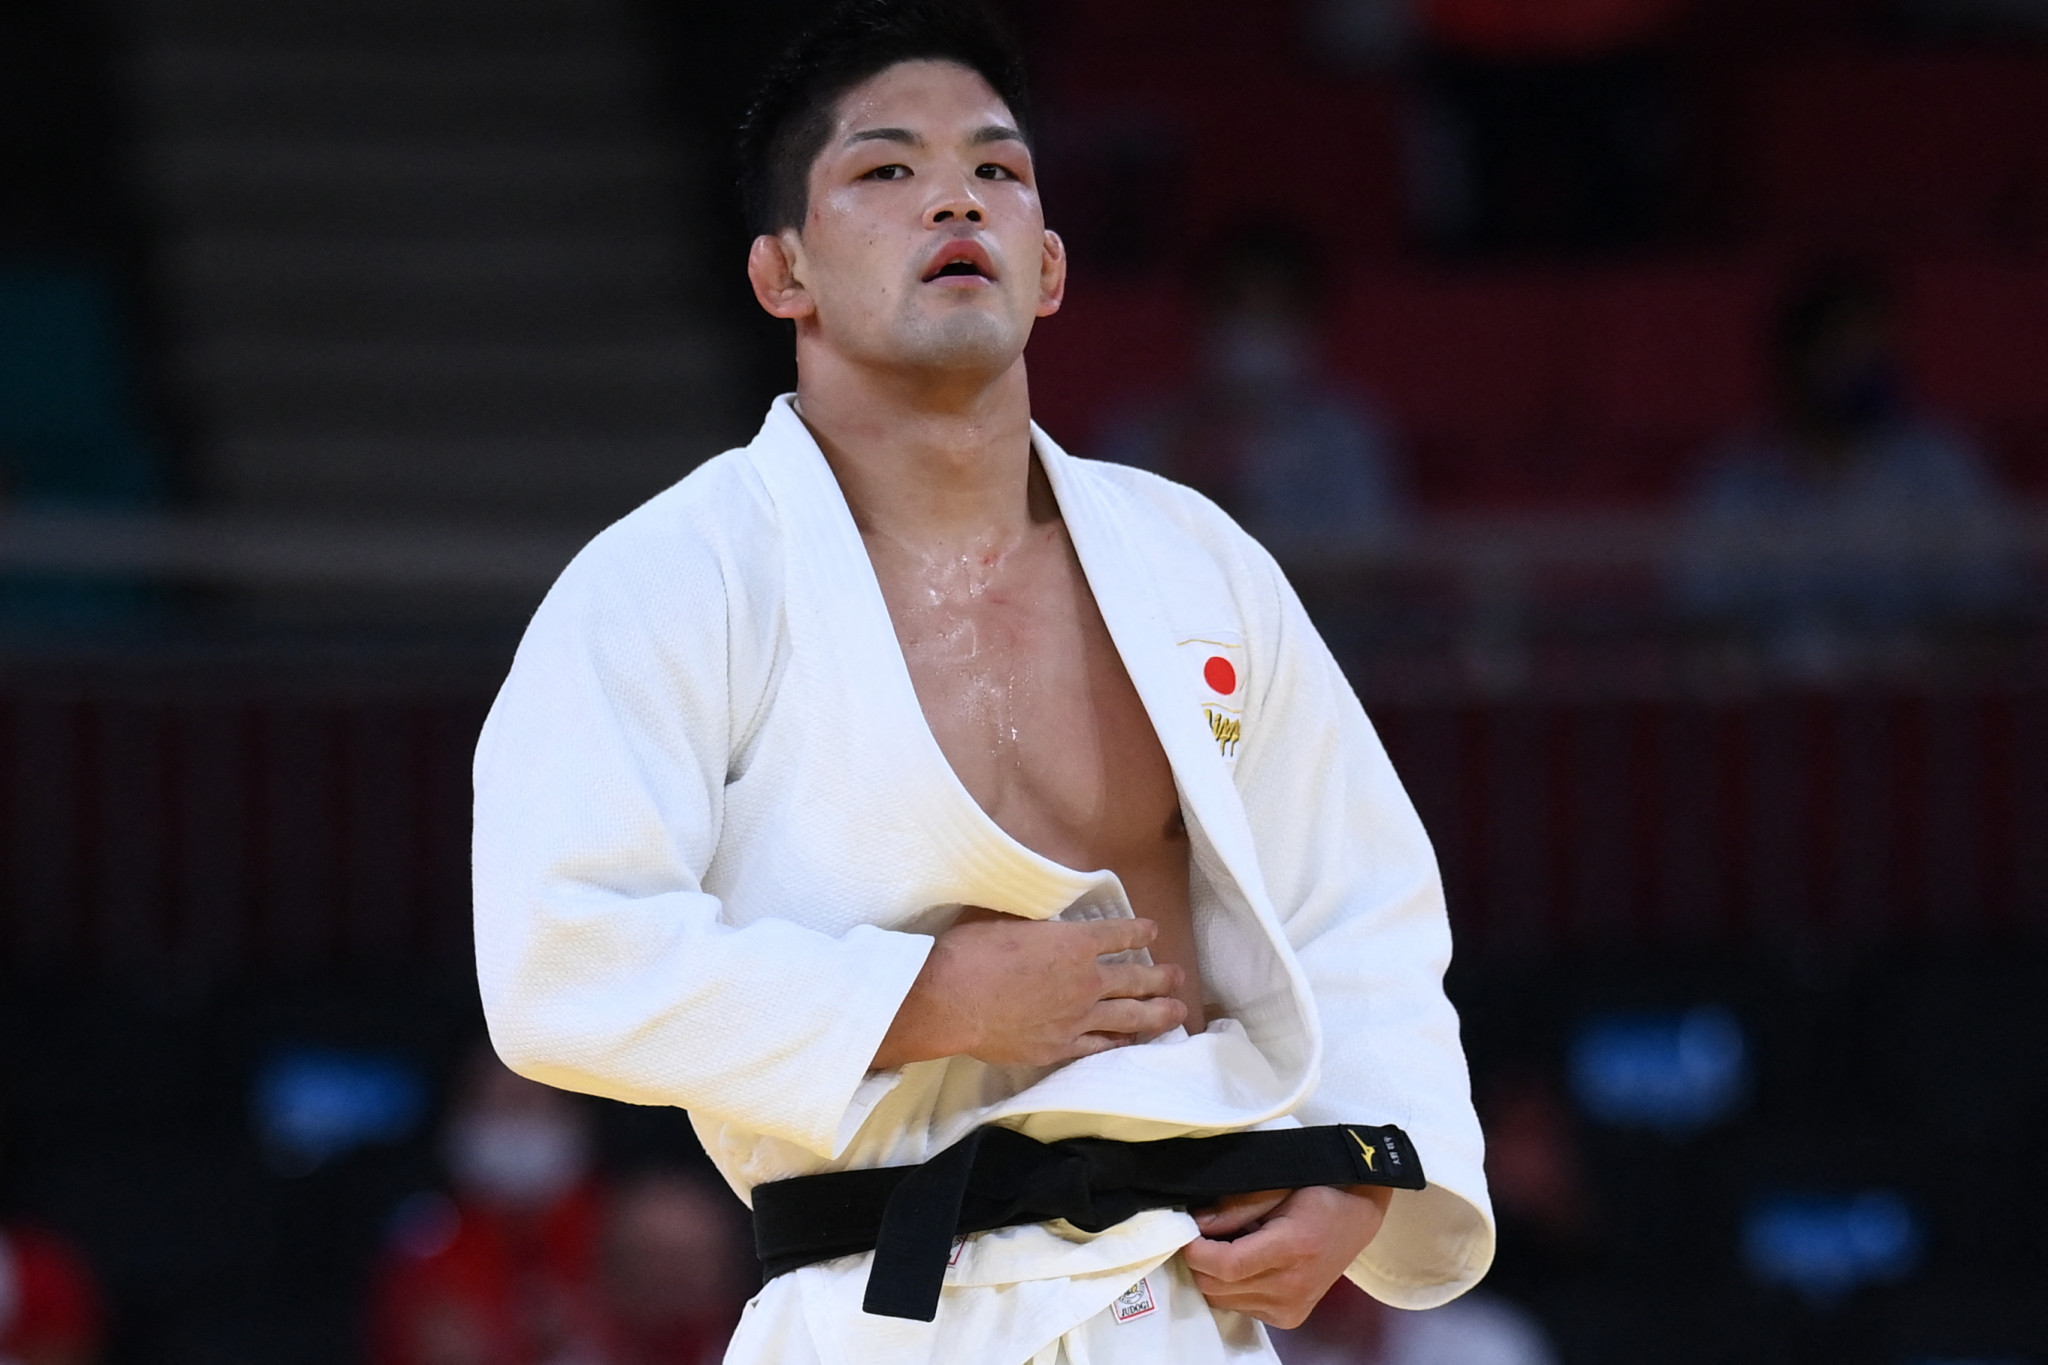 Olympic judo champion Shohei Ono of Japan who confirmed his retirement this week has decided to pursue a two-year coaching programme in England ©Getty Images